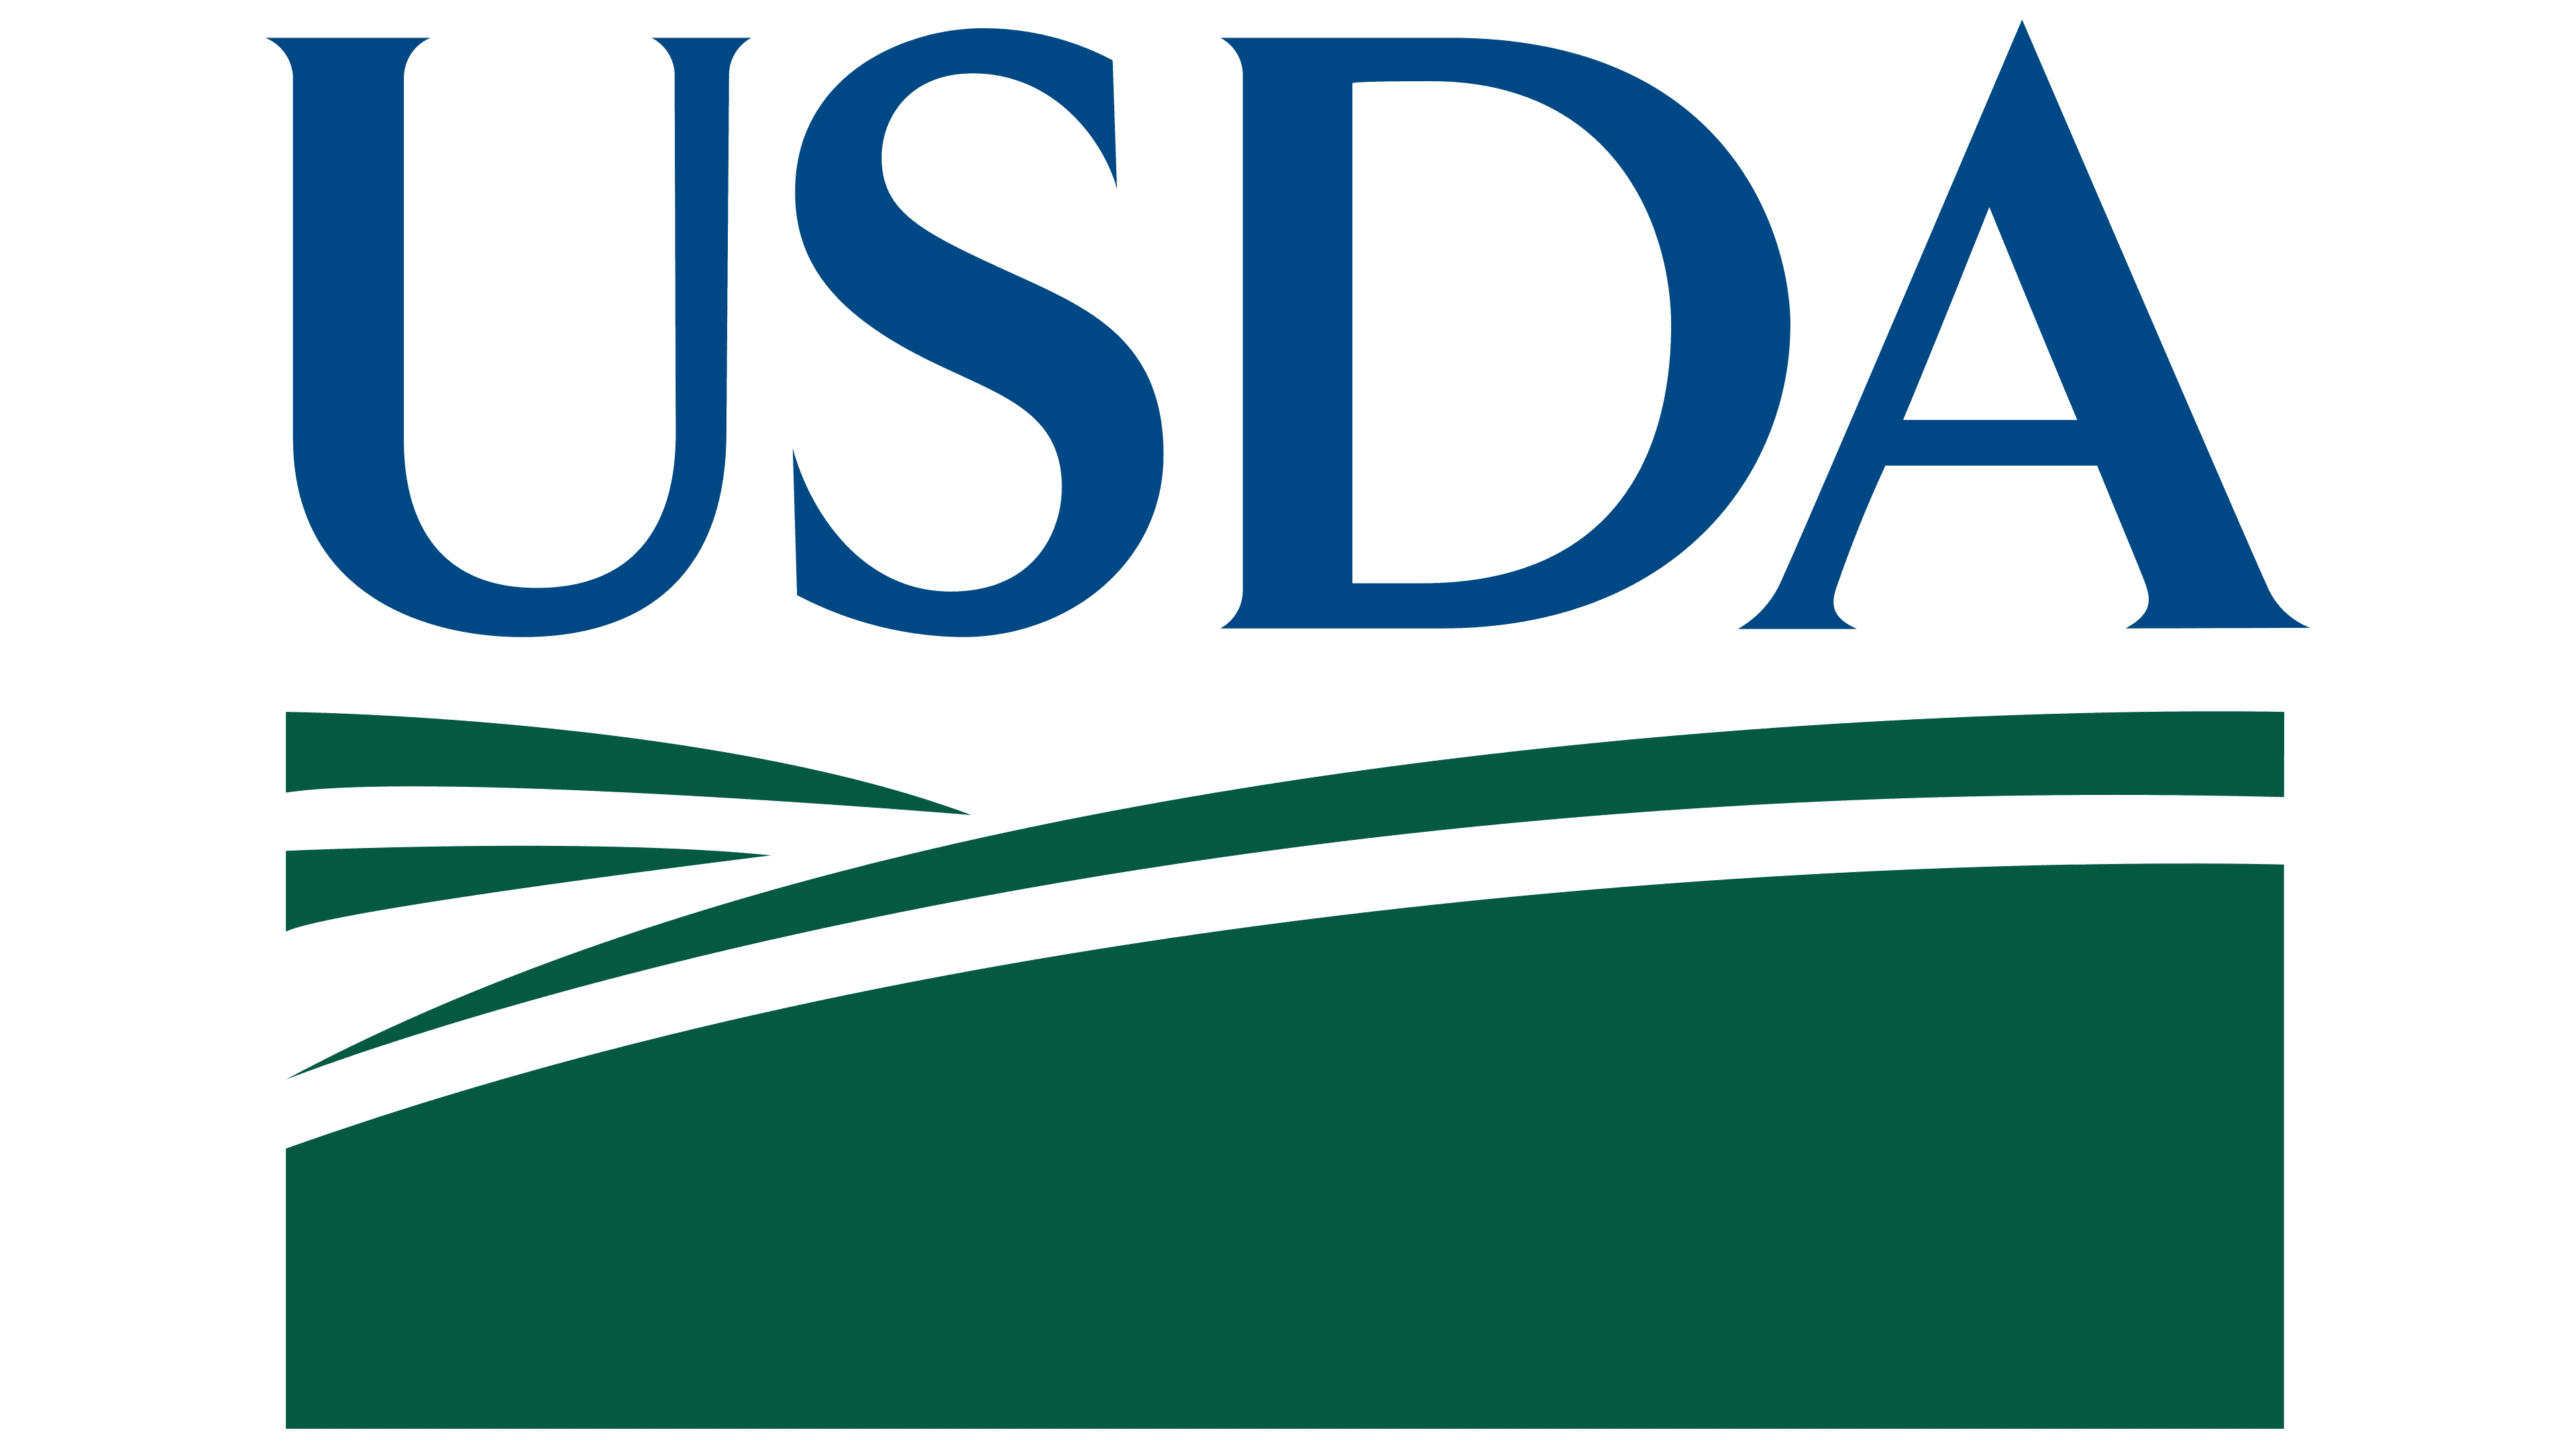 USDA Announces Actions on Nutrition Security | USDA